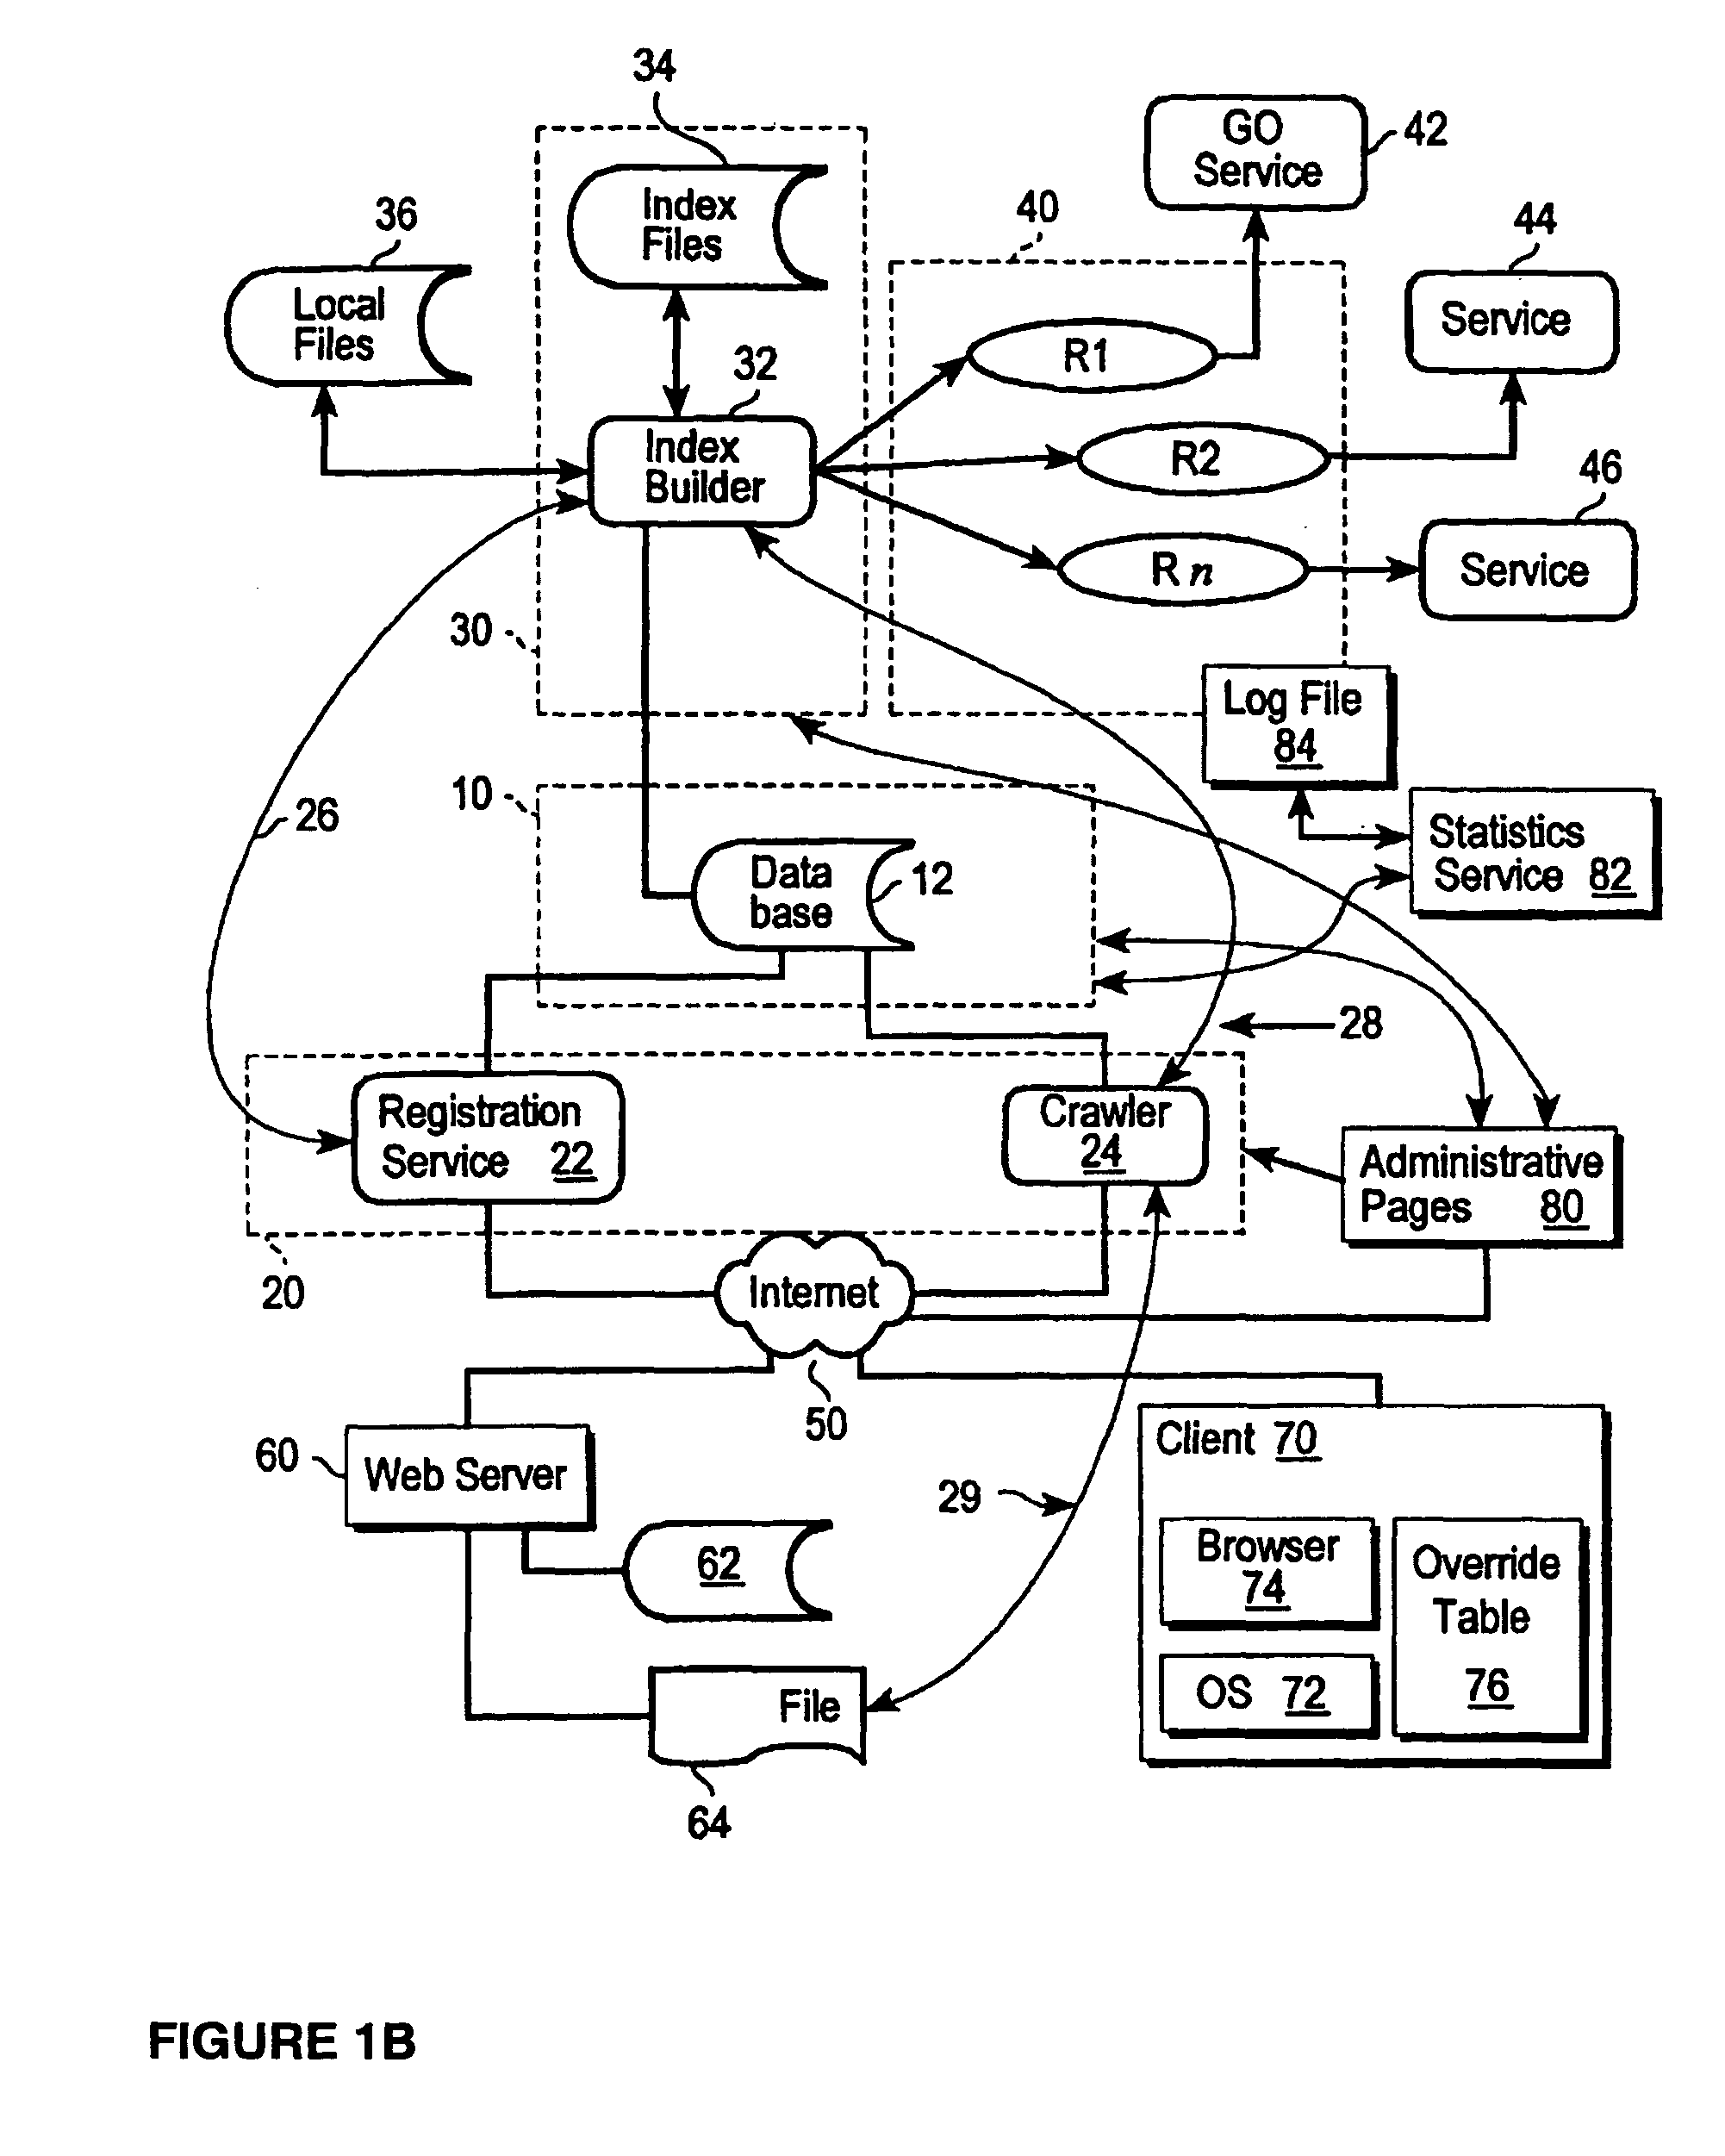 Method for performing transactional communication using a universal transaction account identifier assigned to a customer